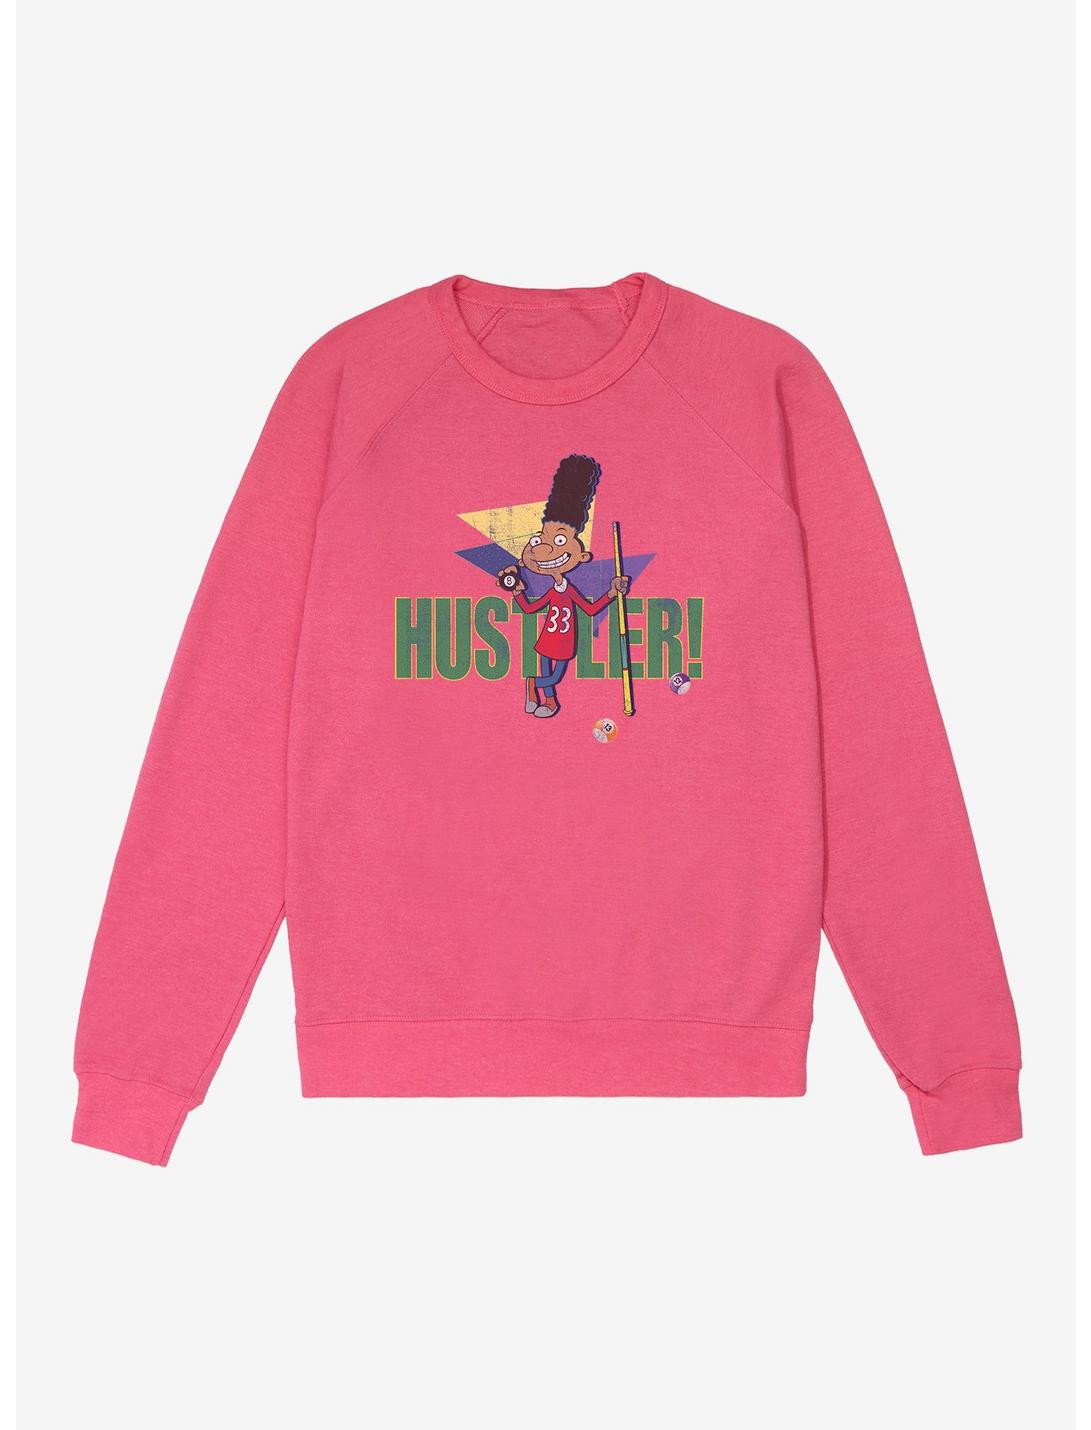 Hey Arnold! Hustler! French Terry Sweatshirt, HELICONIA HEATHER, hi-res